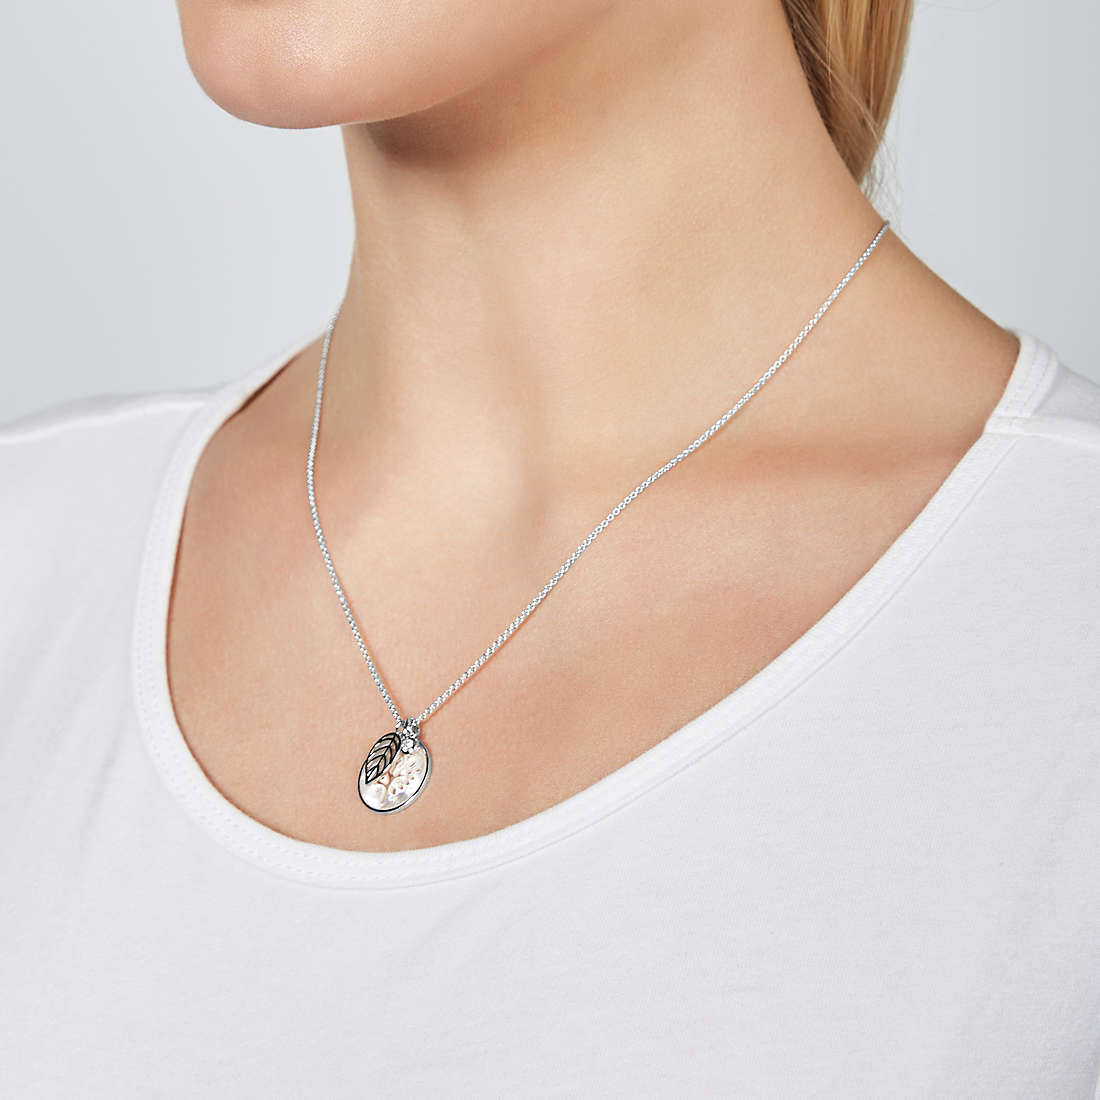 Fossil necklaces Sterling Silver woman JFS00509040 wearing